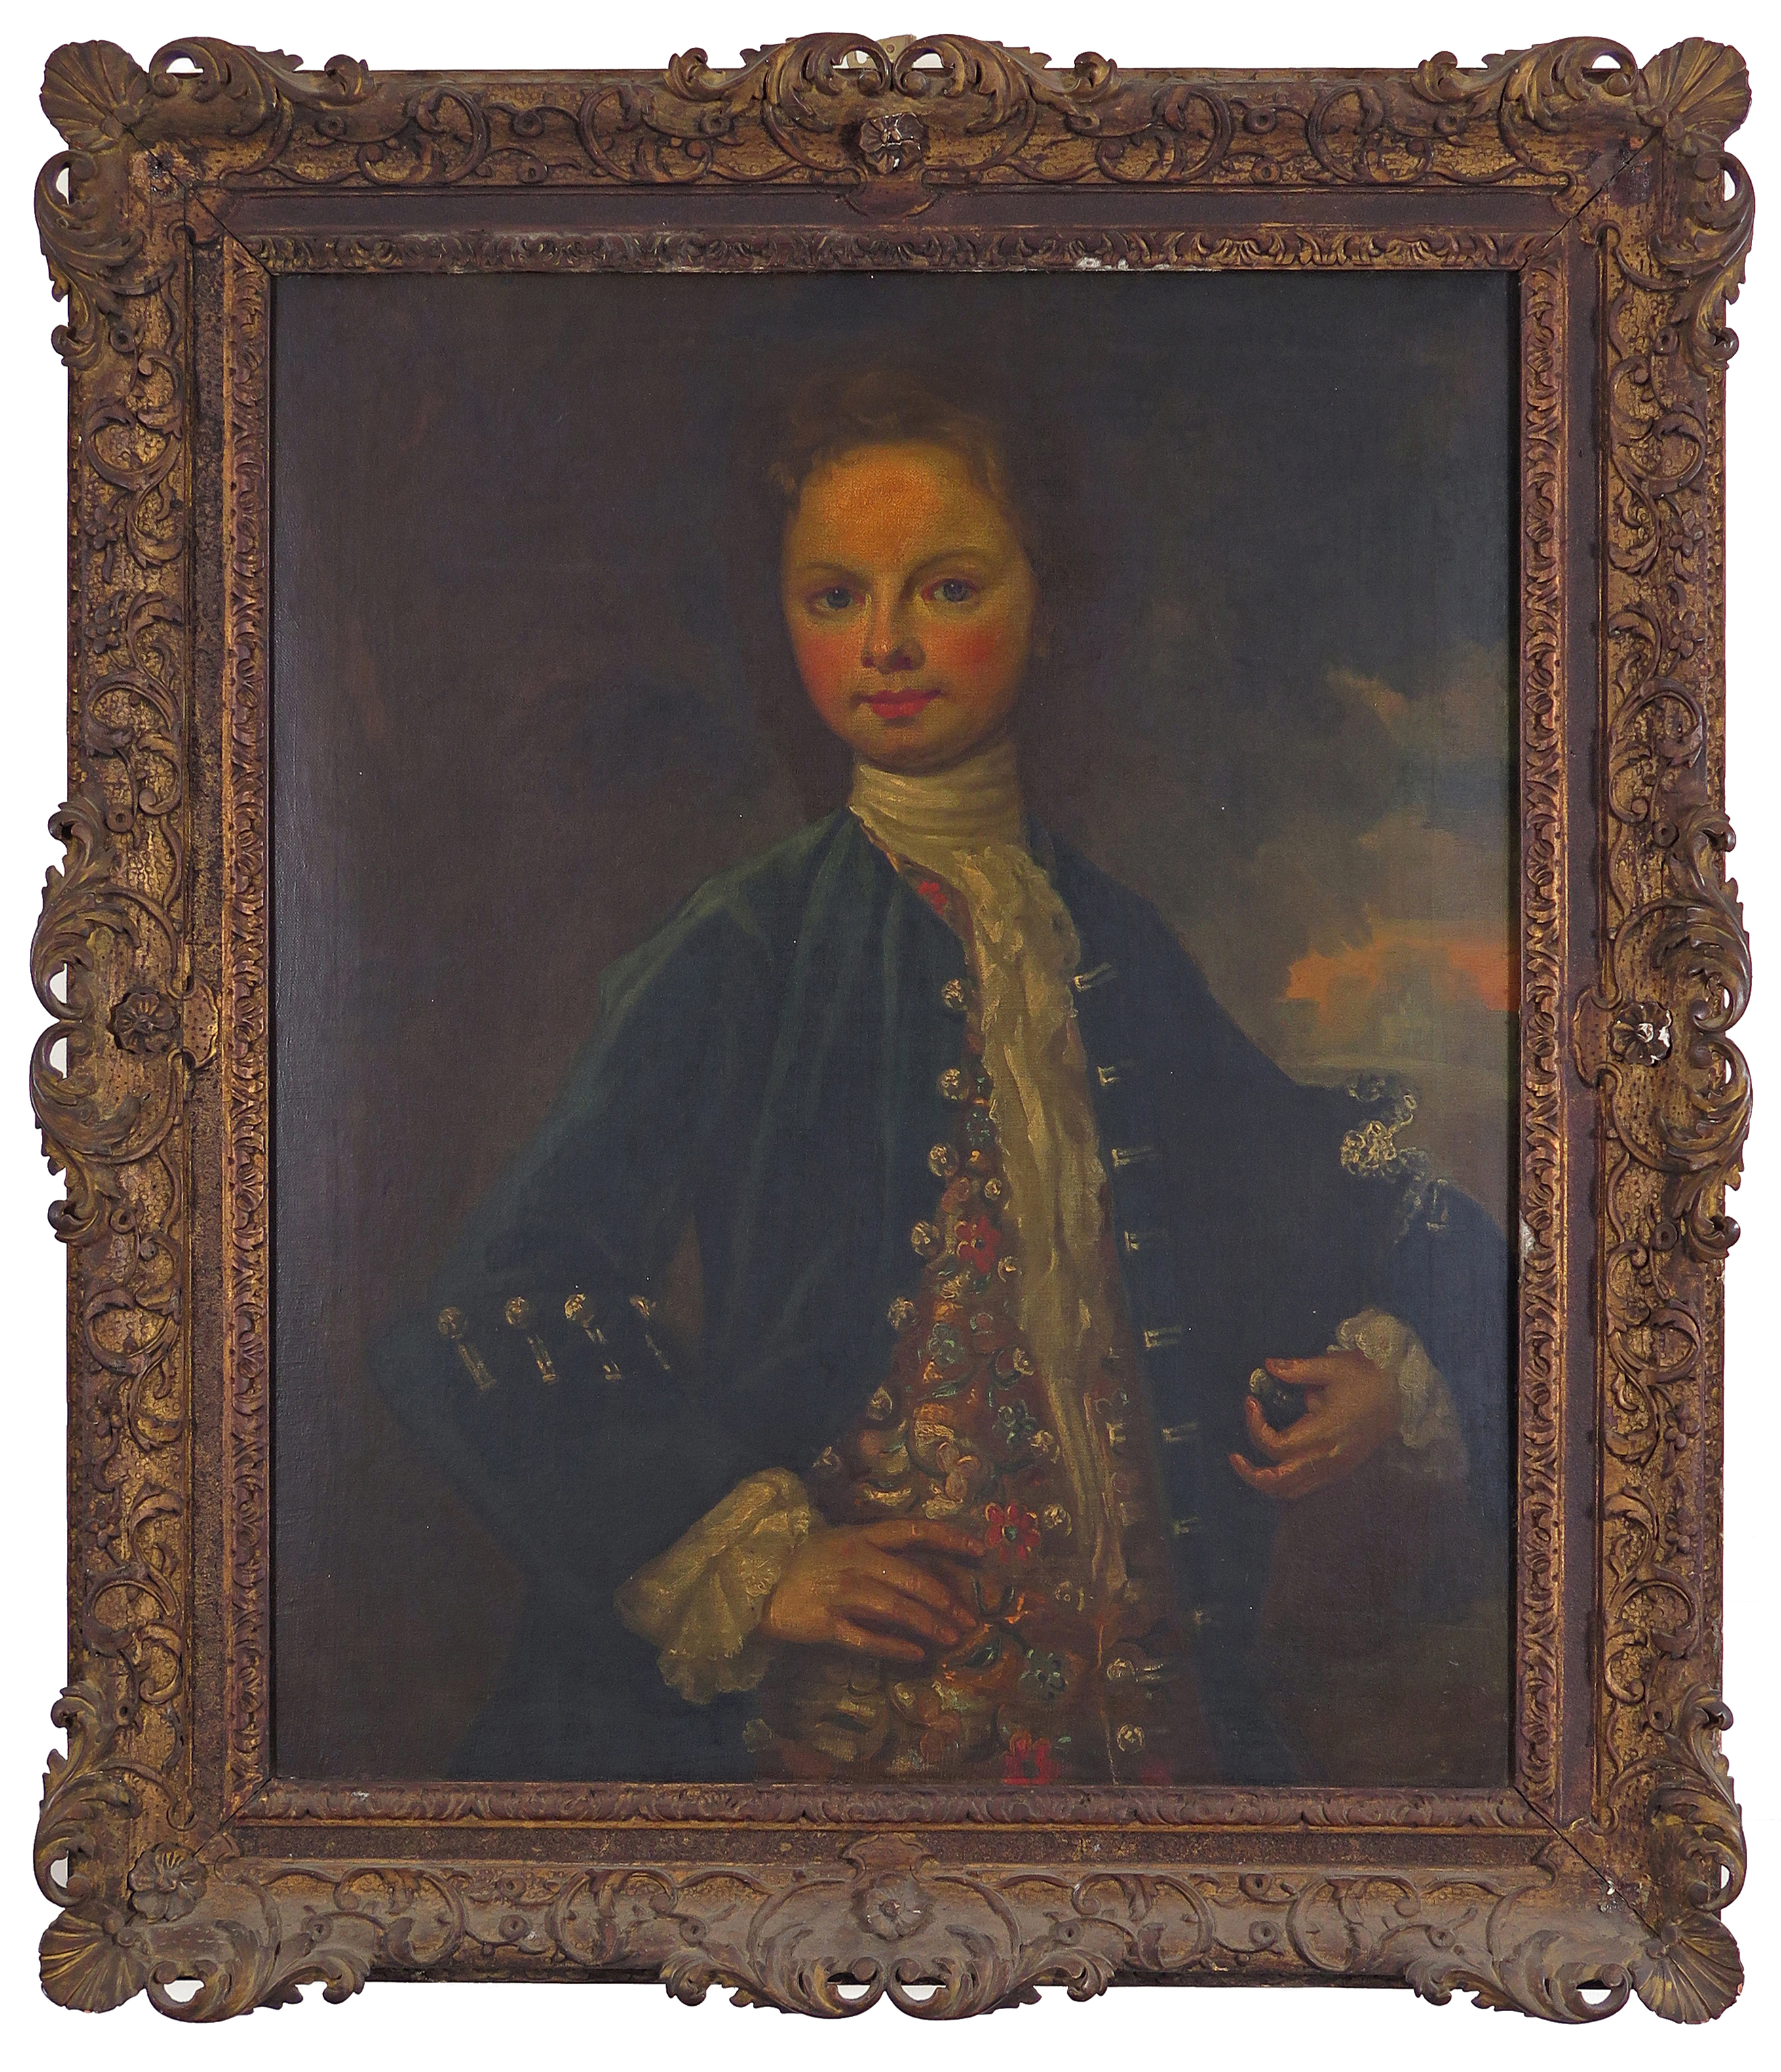 English School 18th Century Portrait of a young man wearing a decorative waistcoat and cravat, - Image 2 of 2